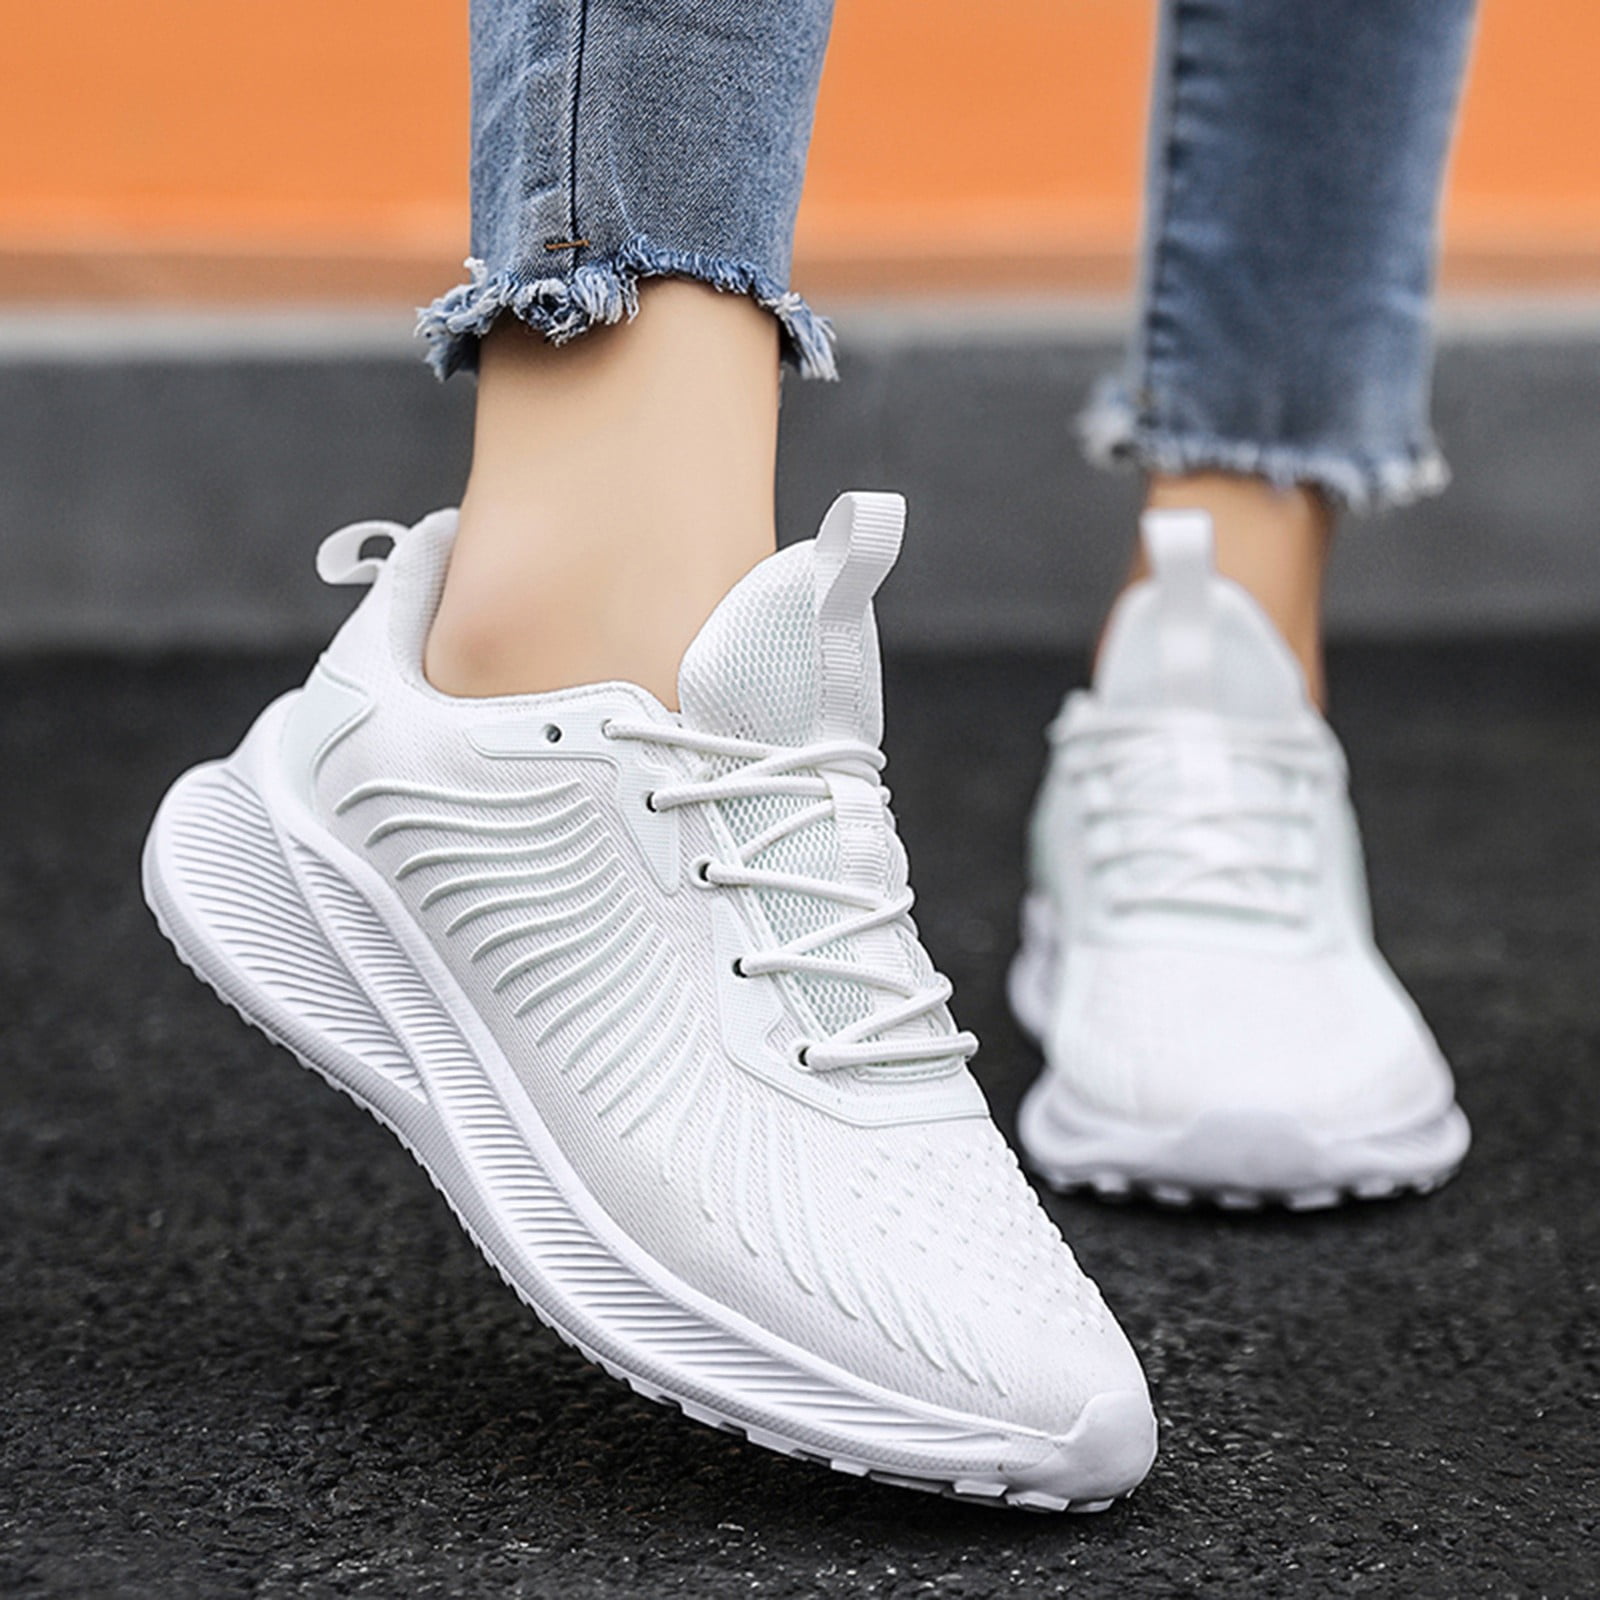 Ladies Shoes Casual Large Size Lightweight Comfortable Breathable Casual  Shoes Sports Shoes Women's Walking Shoes Sock Sneakers Size 9 Womens Fresh  Foam Sneakers Womens Wide Sneakers Size 10 Womens 